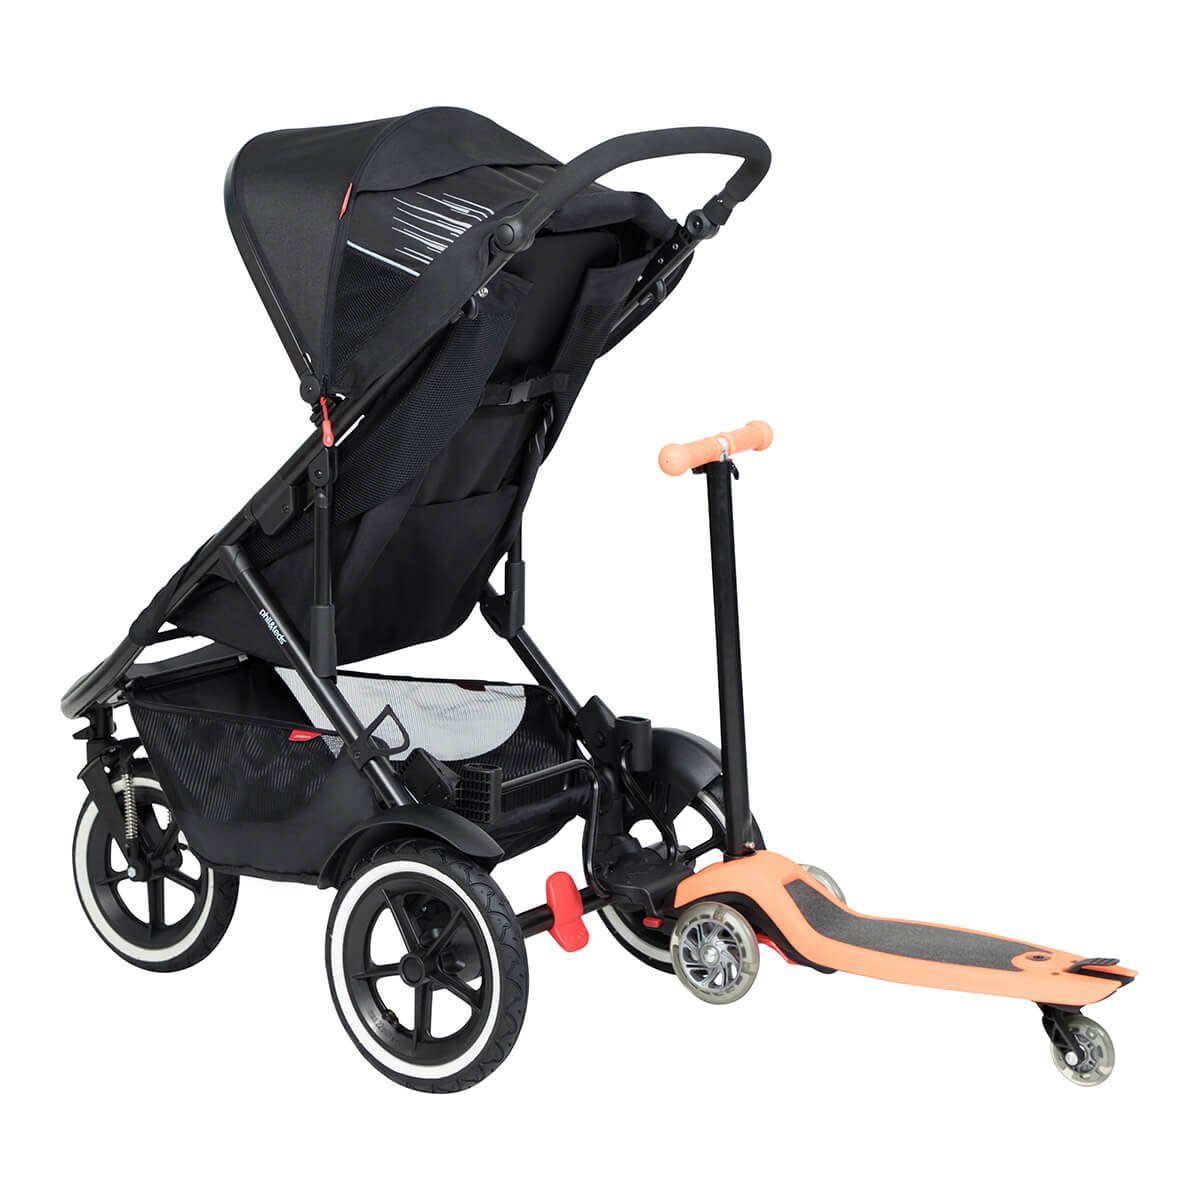 https://cdn.accentuate.io/8582363054419/19272668348504/philteds-sport-buggy-with-freerider-stroller-board-in-rear-v1700698190745.jpg?1200x1200